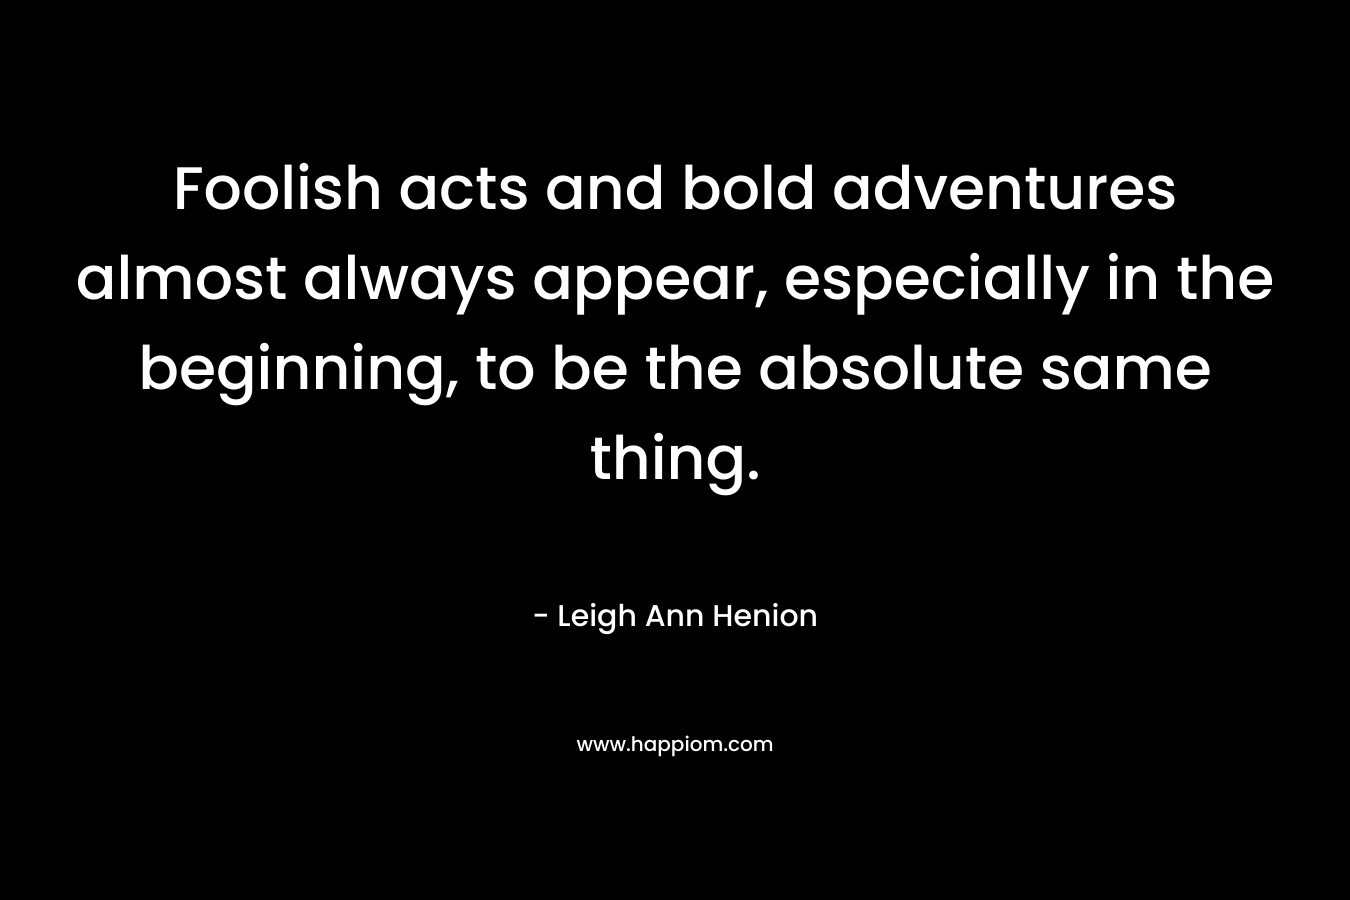 Foolish acts and bold adventures almost always appear, especially in the beginning, to be the absolute same thing.